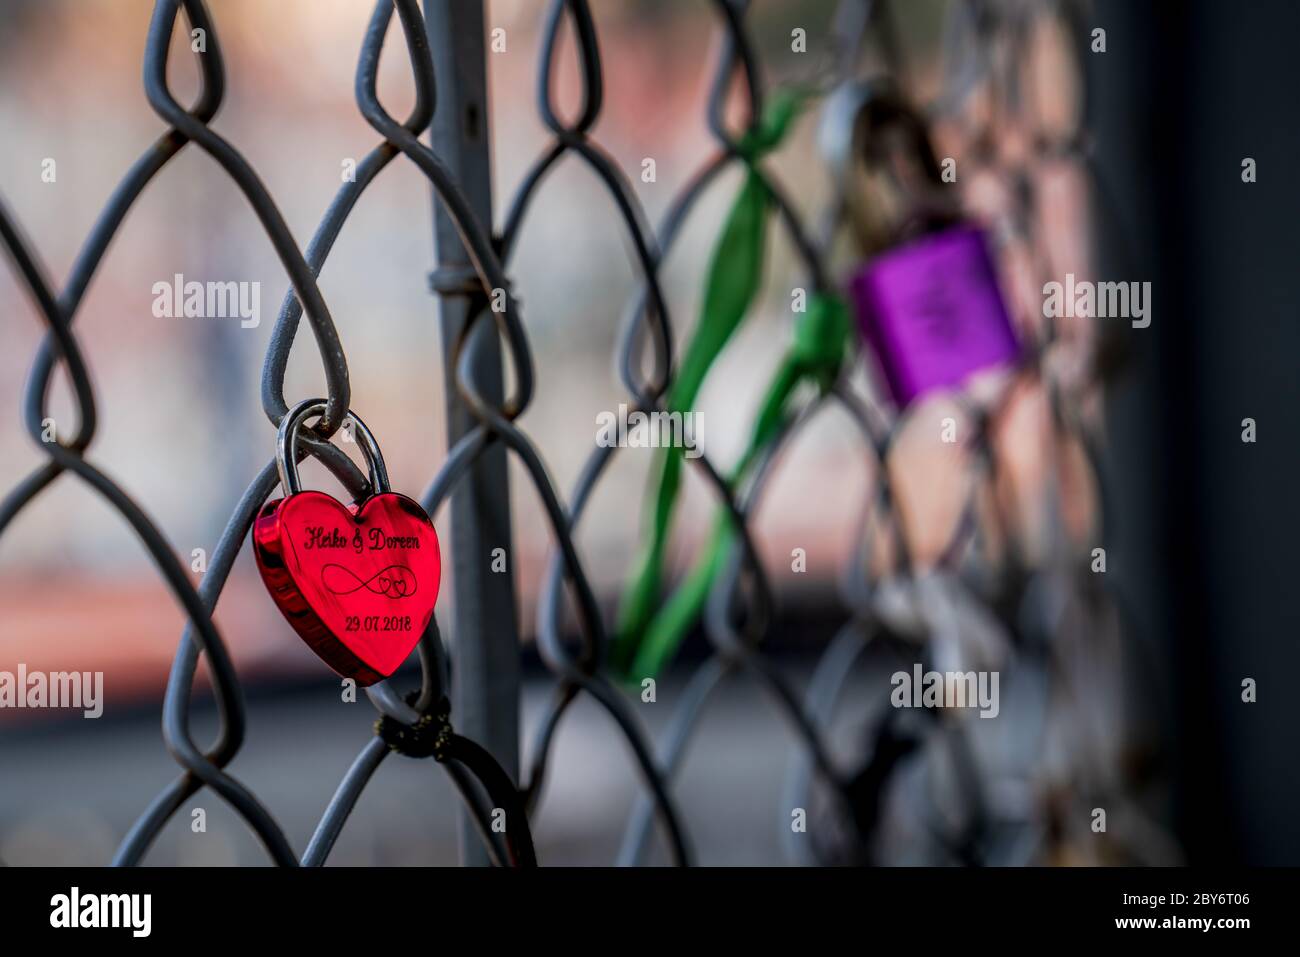 Lovelocks or love padlock that sweethearts lock to a fence on a bridge to symbolize their love for each other. Photograph: Tony Taylor Stock Photo